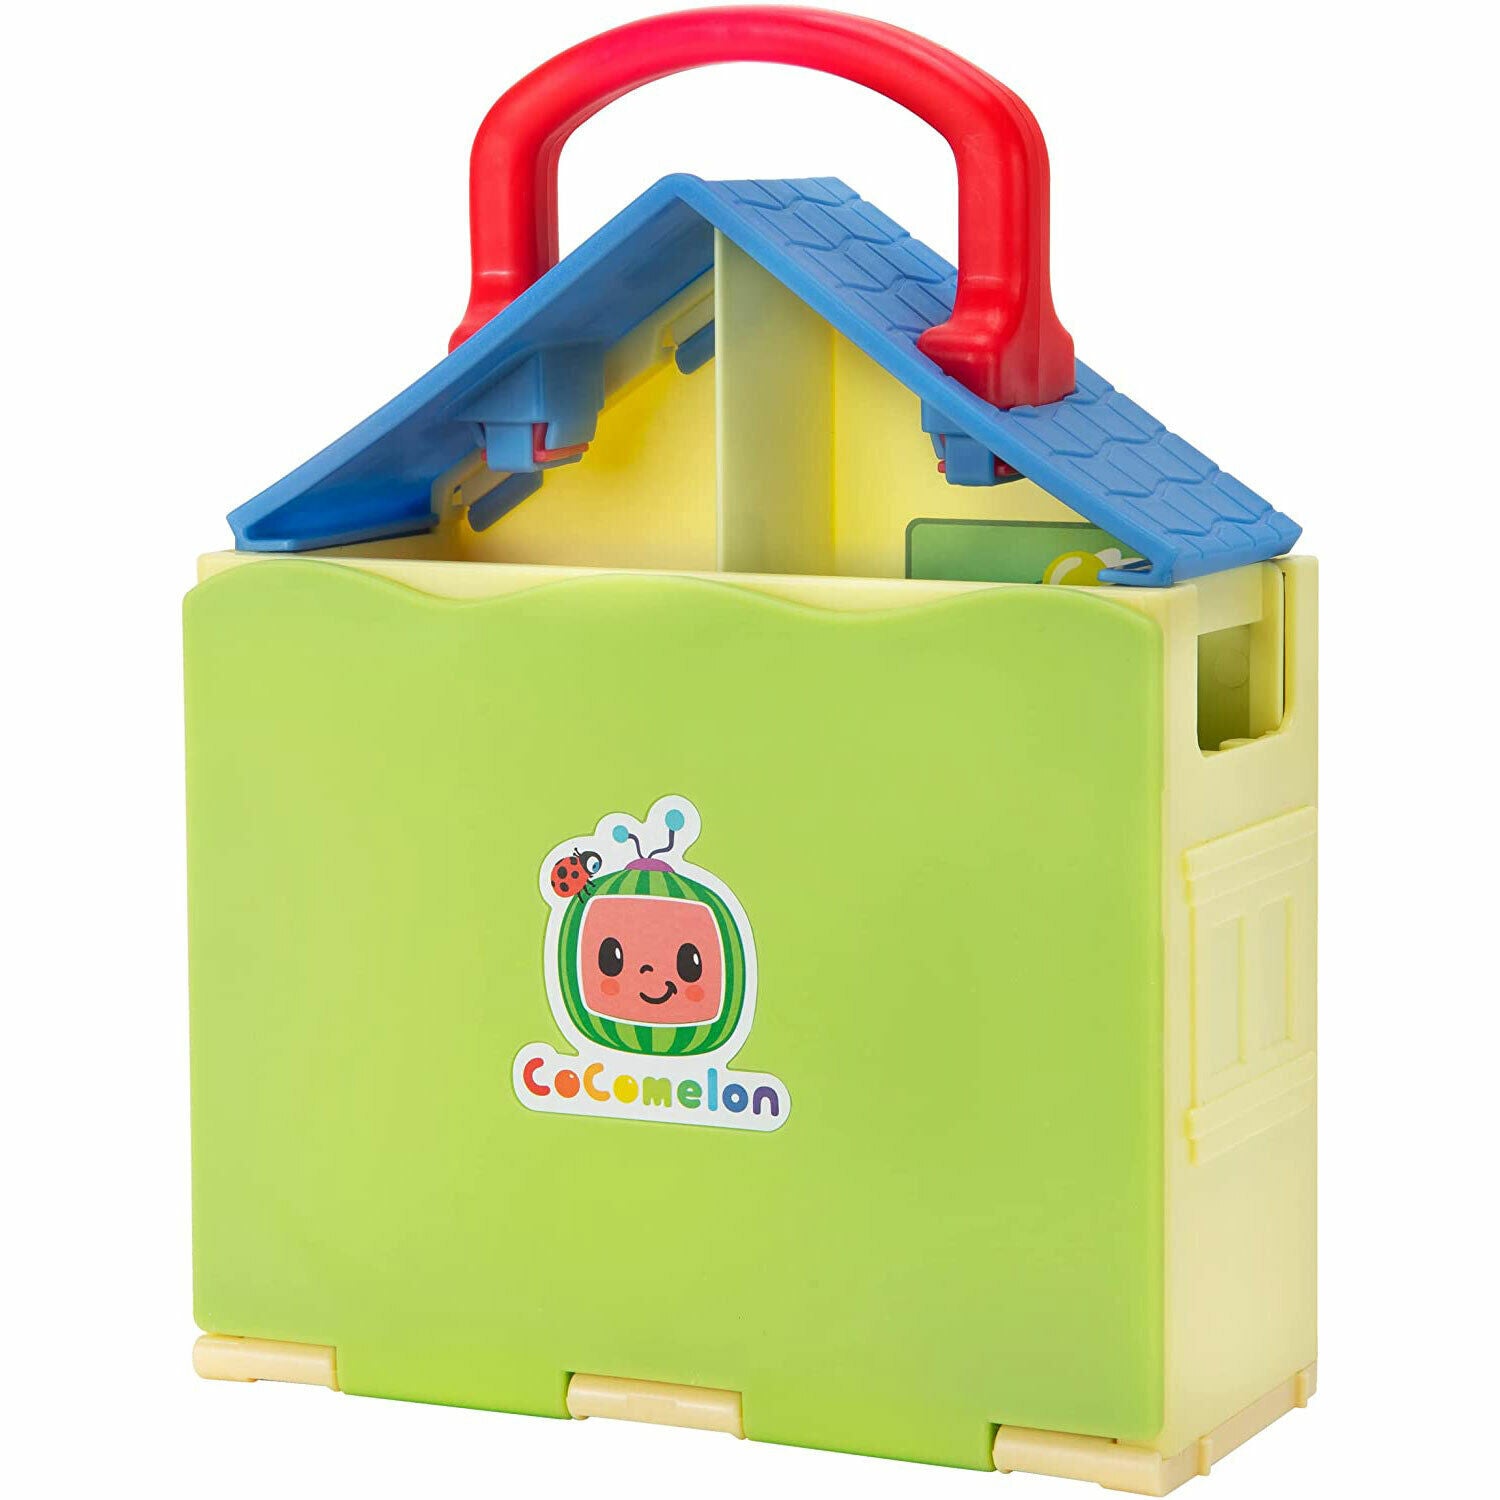 New CoComelon Pop N' Play House Playset - Fun for Kids!